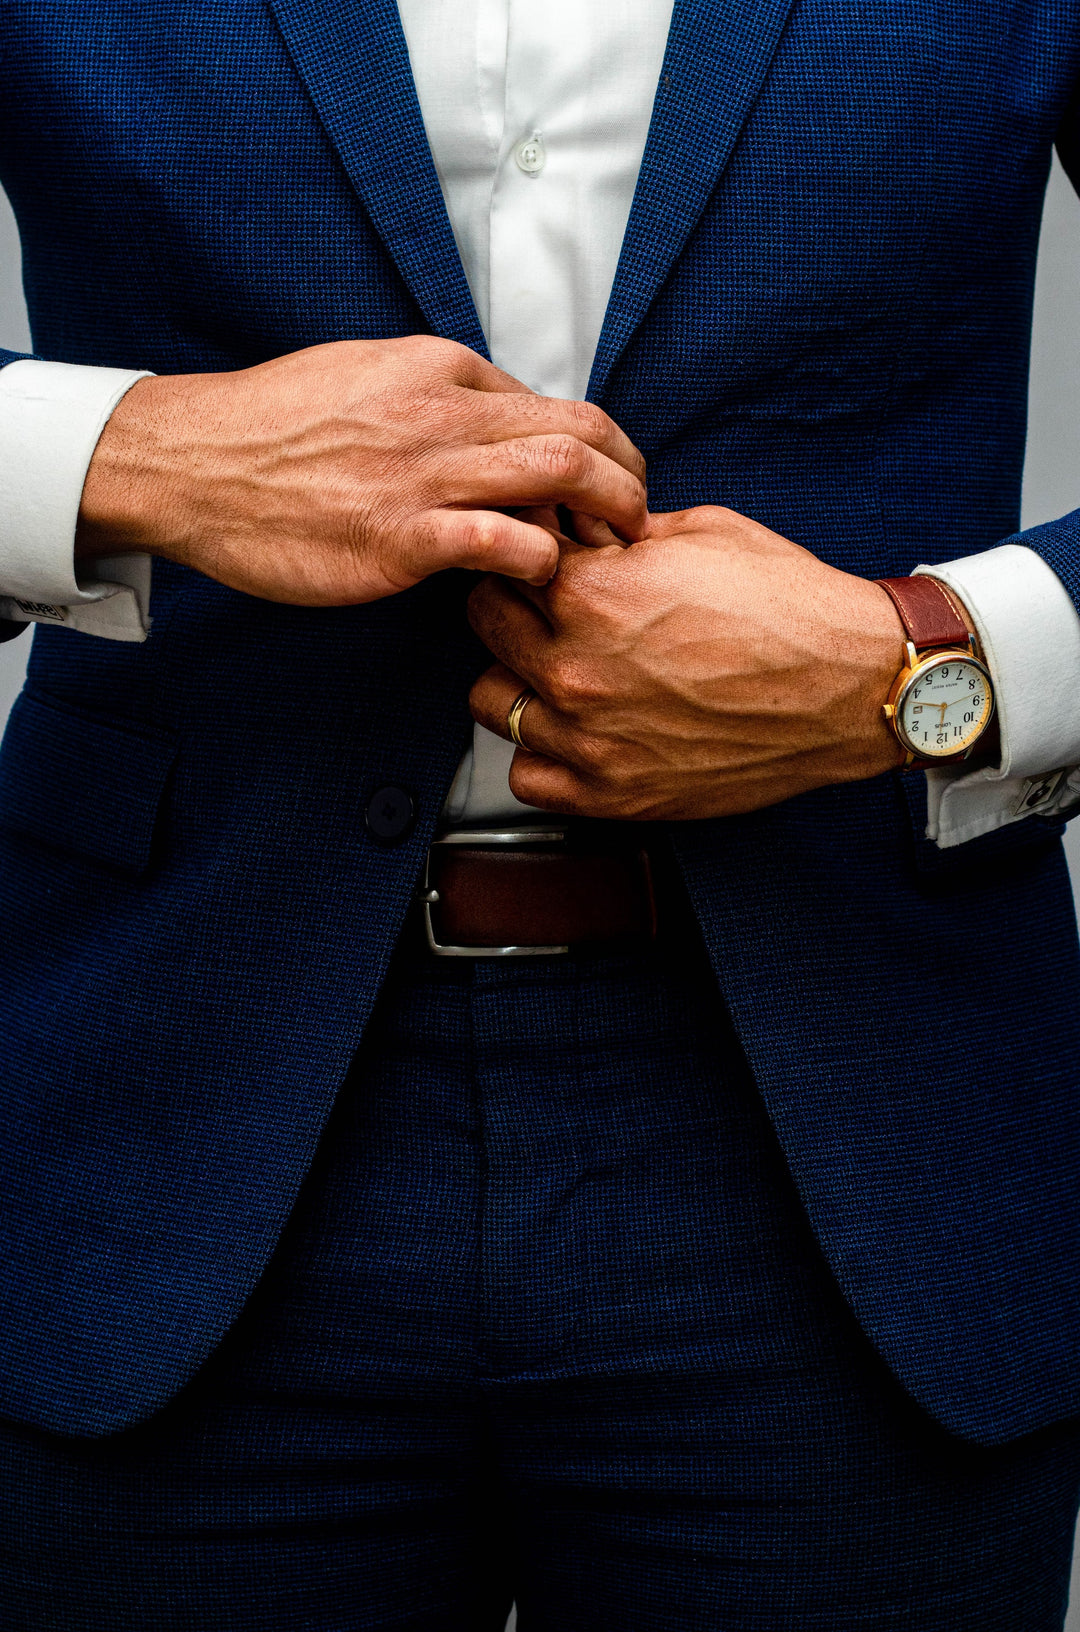 5 Rules all men should follow to dress well